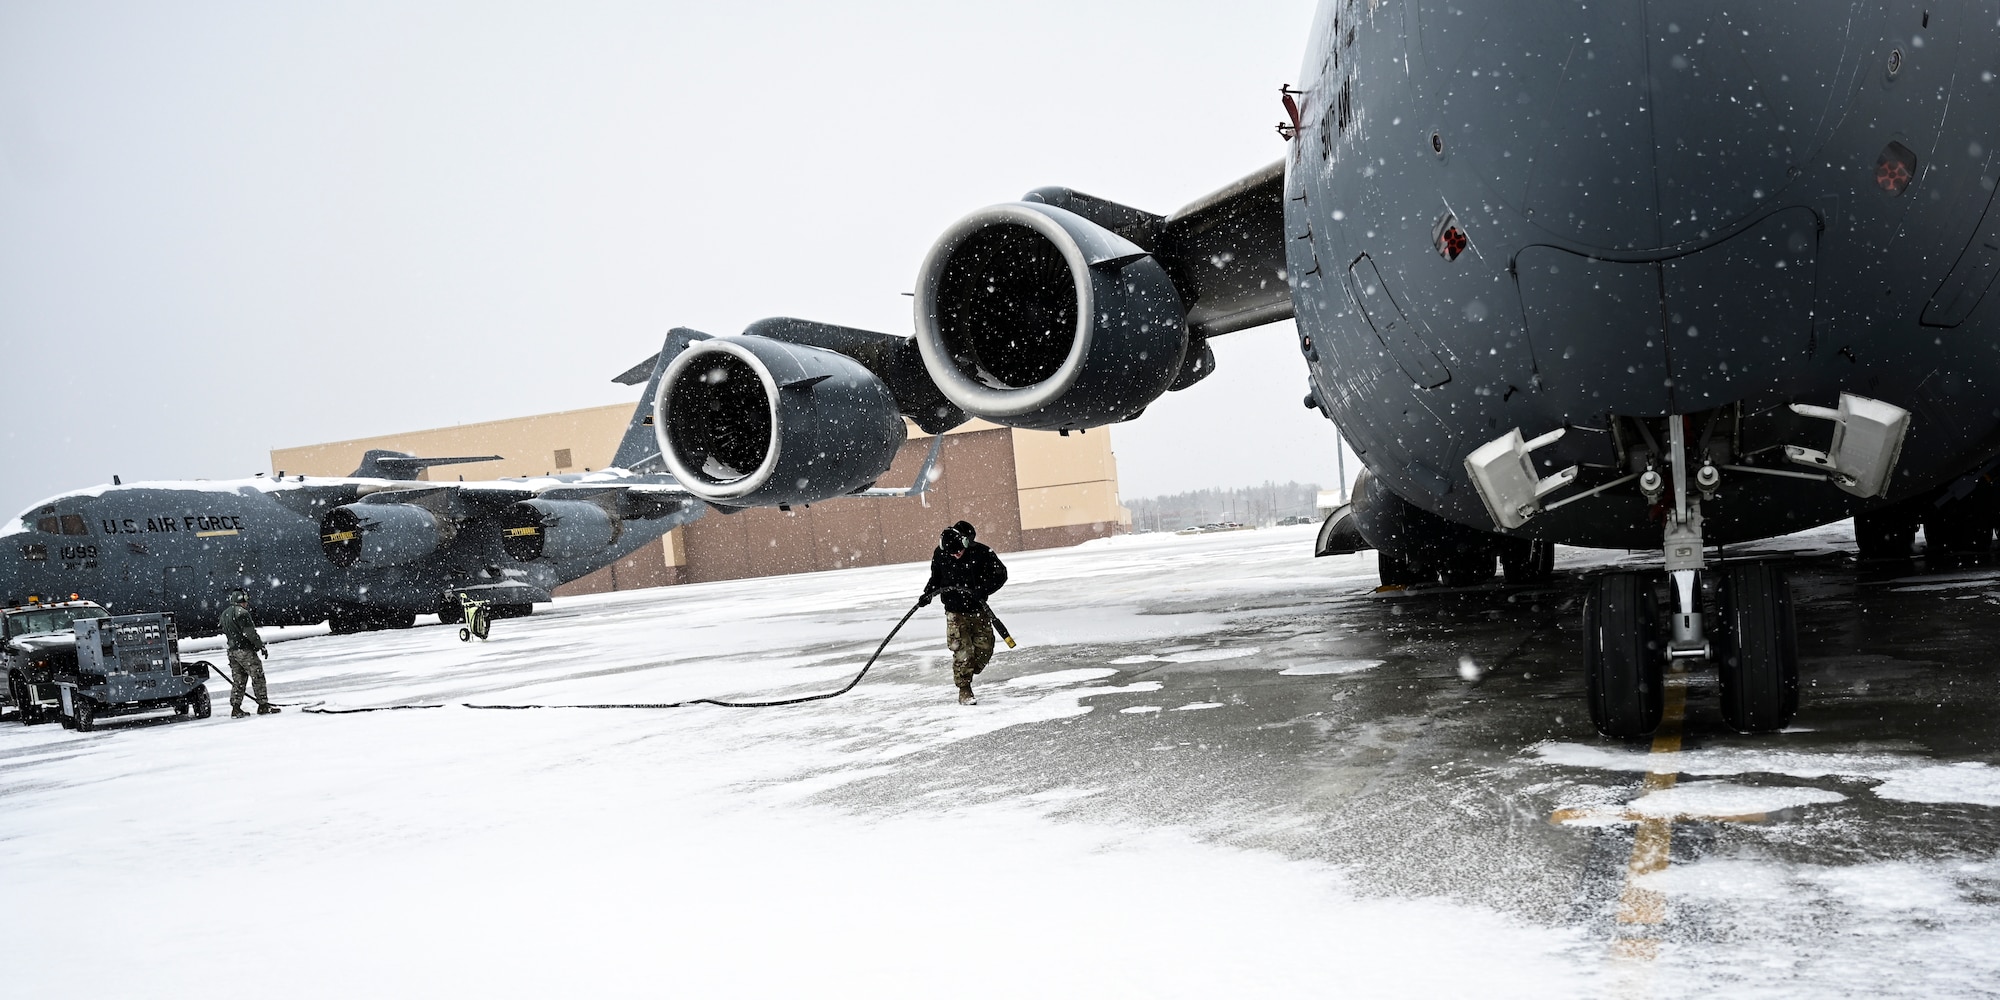 Master Sgt. Timothy Schurr, 911th Aircraft Maintenance Squadron guidance and controls technician, pulls a power cord from a generator to a C-17 Globemaster III in order to conduct routine maintenance at the Pittsburgh International Airport Air Reserve Station, Pennsylvania, Feb. 16, 2021.